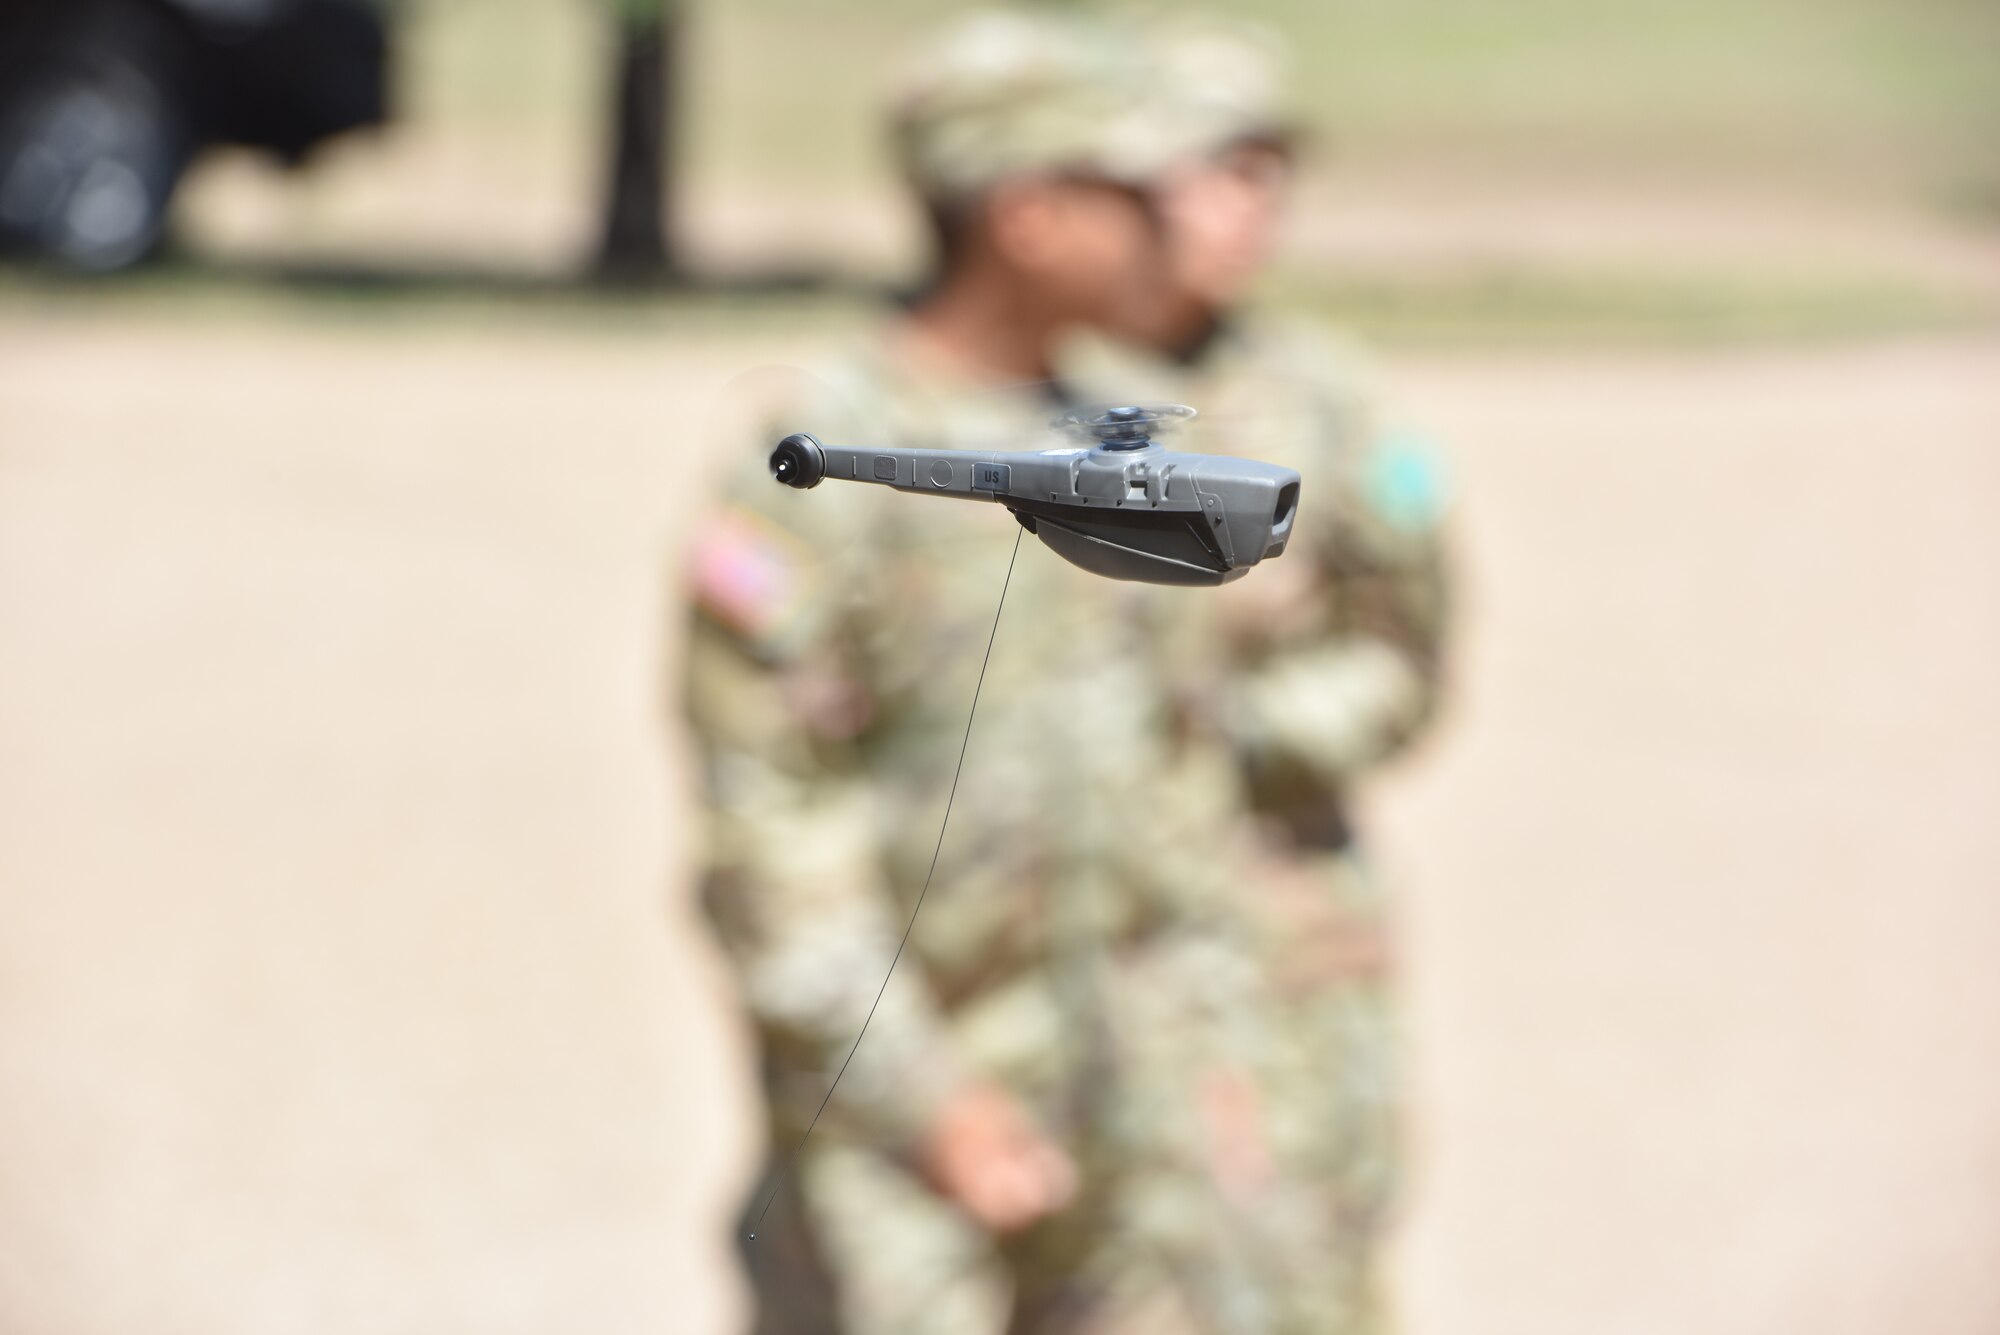 A Black Hornet 3 drone, a personal reconnaissance system, is flown during Police Week at Goodfellow Air Force Base, Texas, May 17, 2023. The Black Hornet 3 was a part of a drone demonstration put on by the 17th Security Forces Squadron. (U.S. Air Force photo by Airman 1st Class Madison Collier)